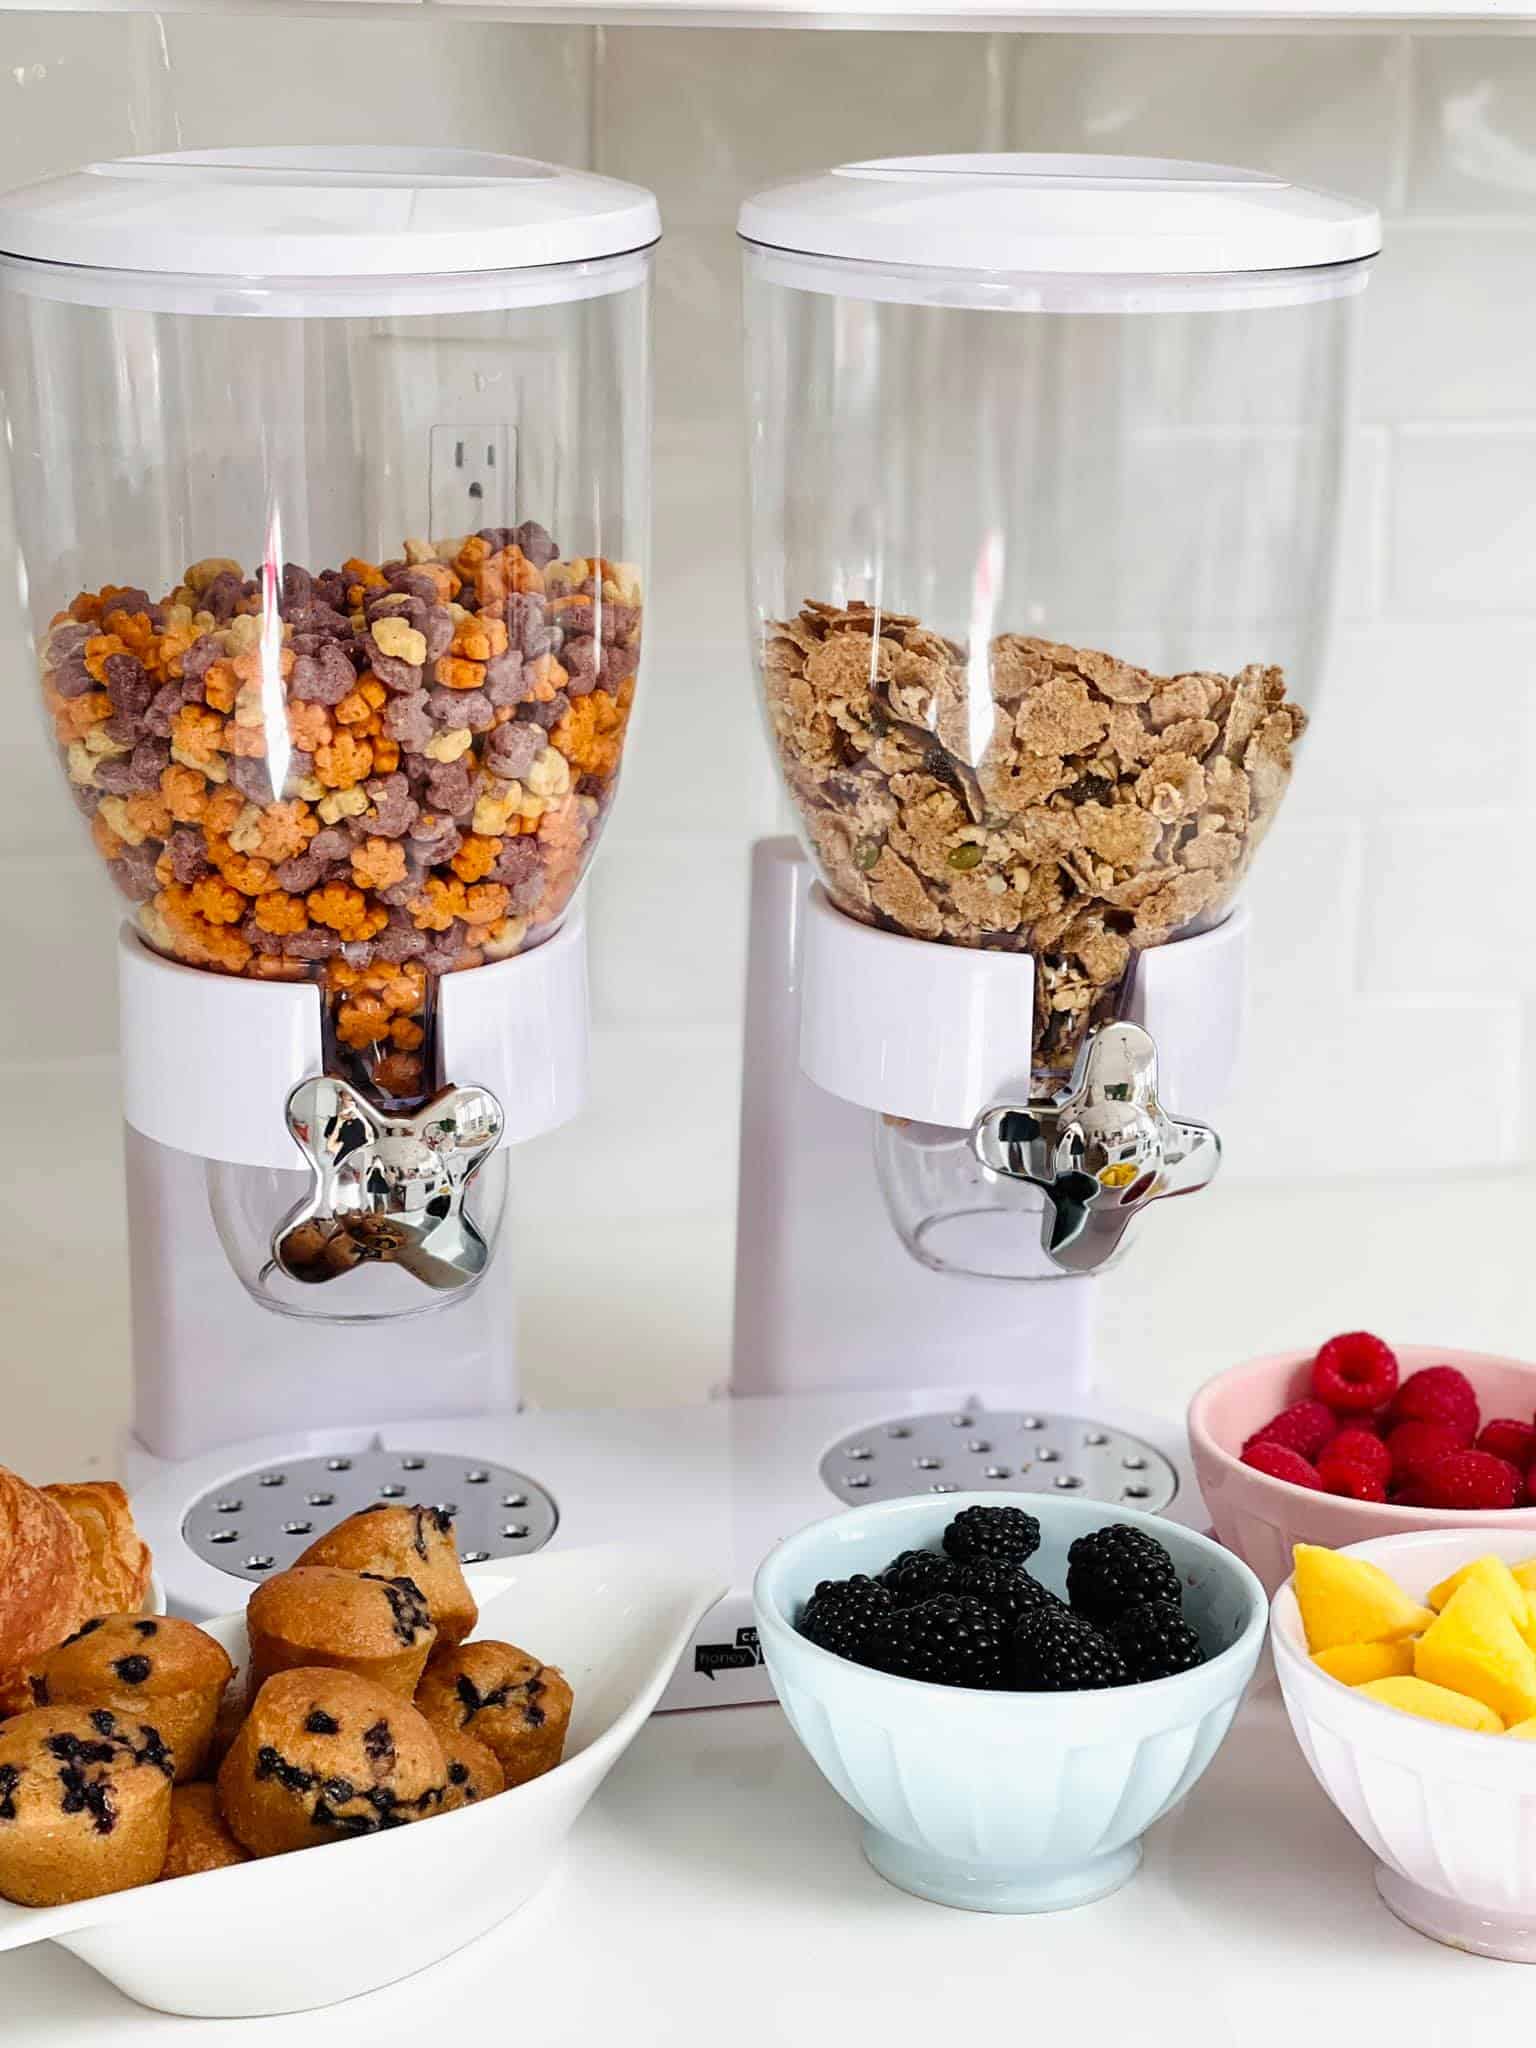 This Kids Self-Serve Breakfast Station Is a Brilliant Mom Hack